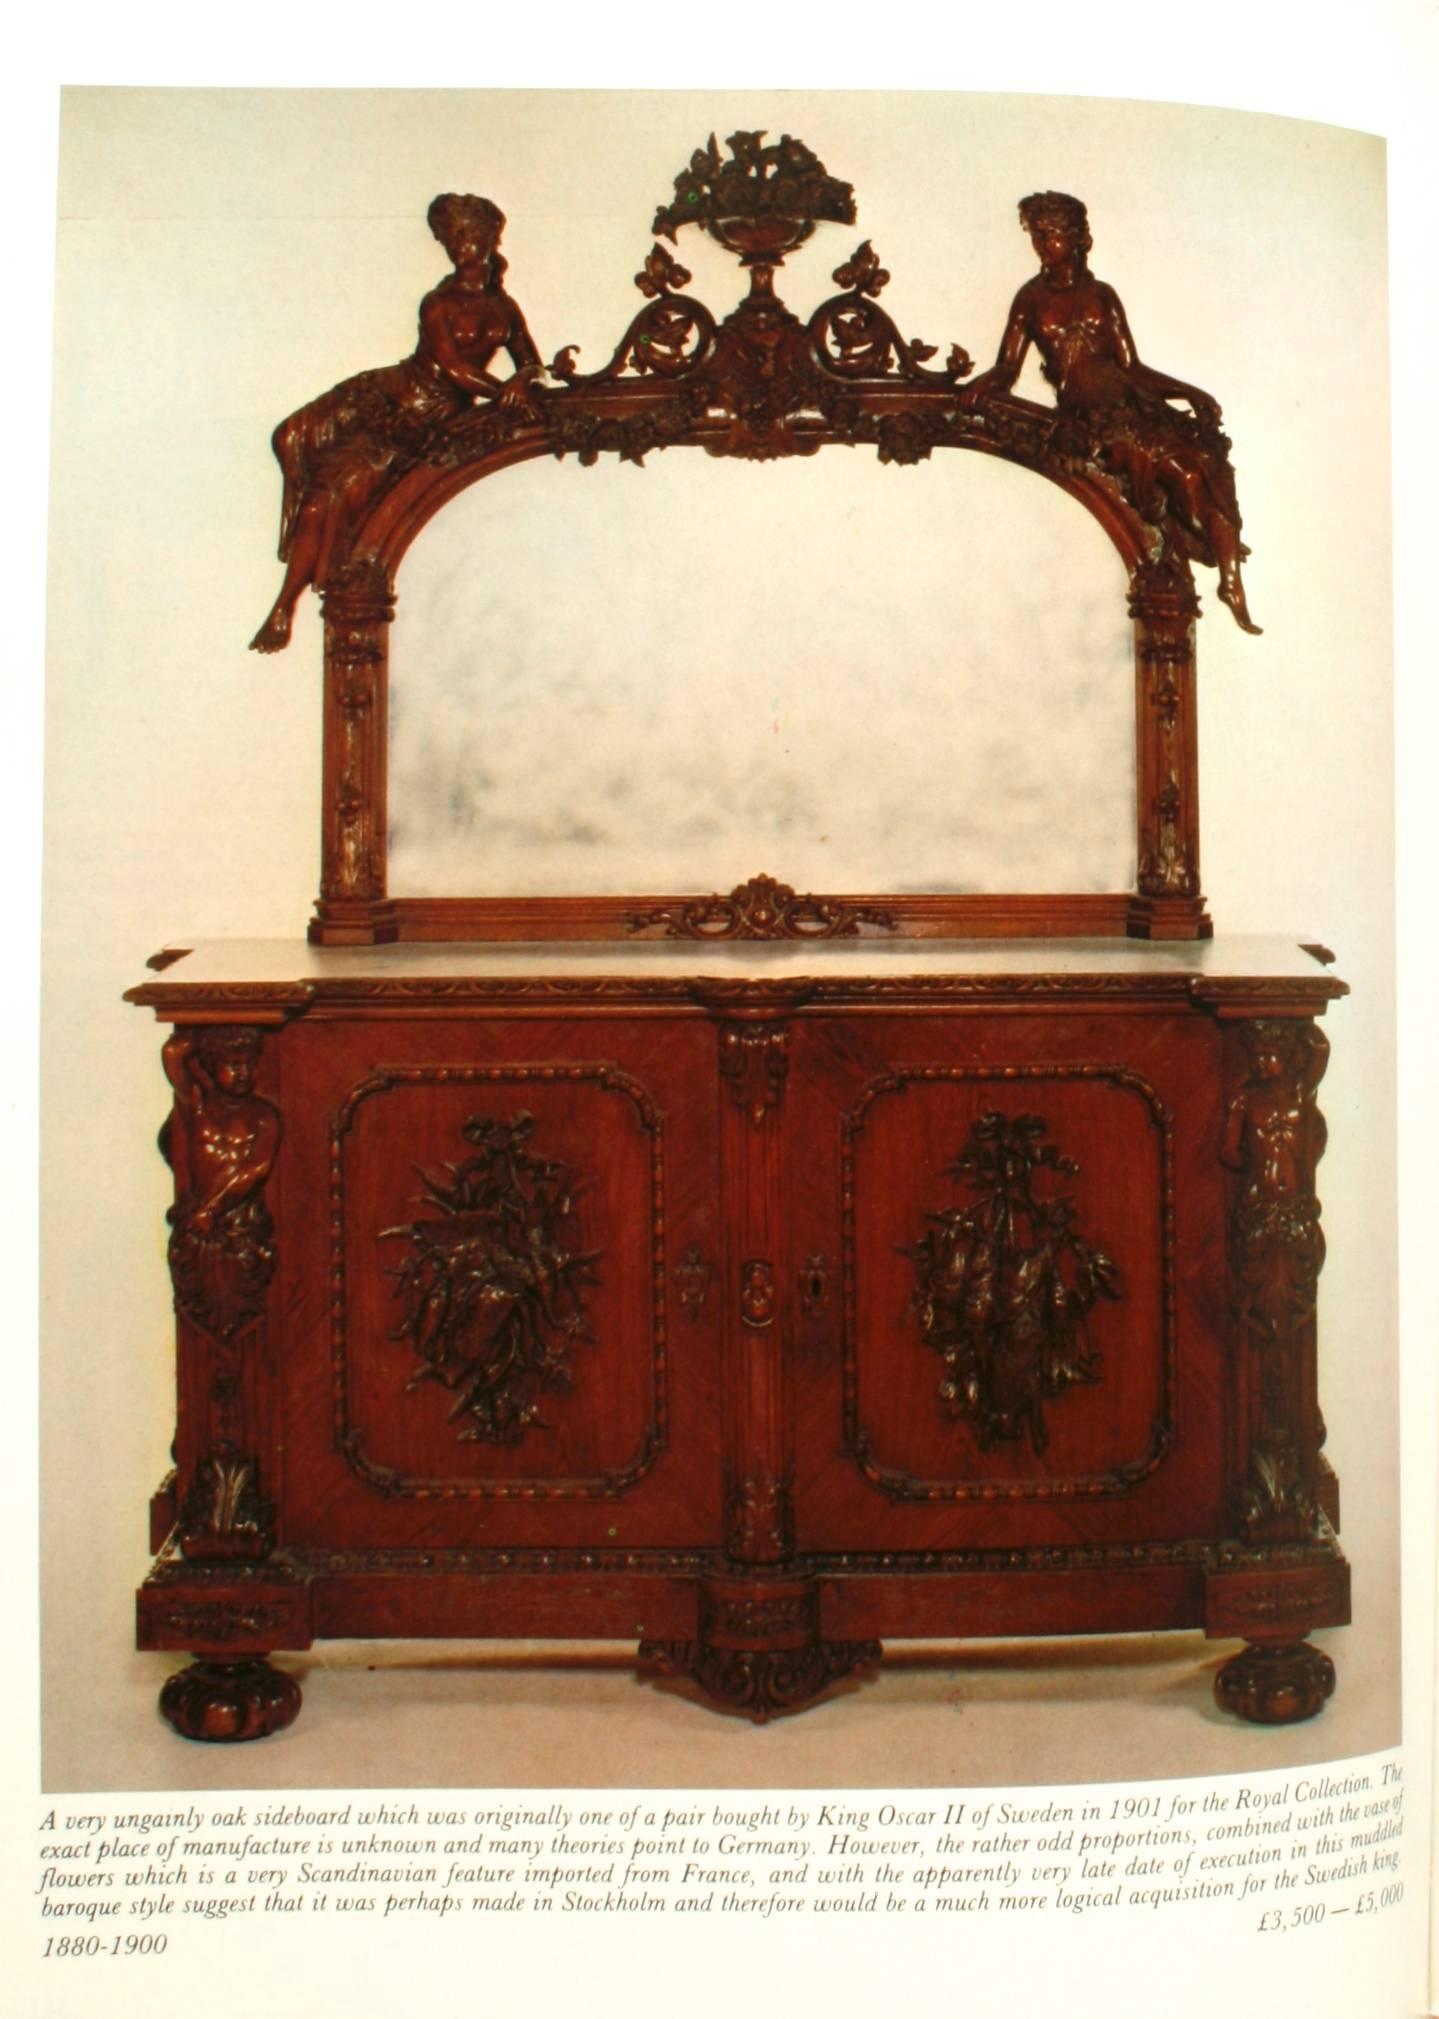 20th Century Price Guide to 19th Century European Furniture, First Edition